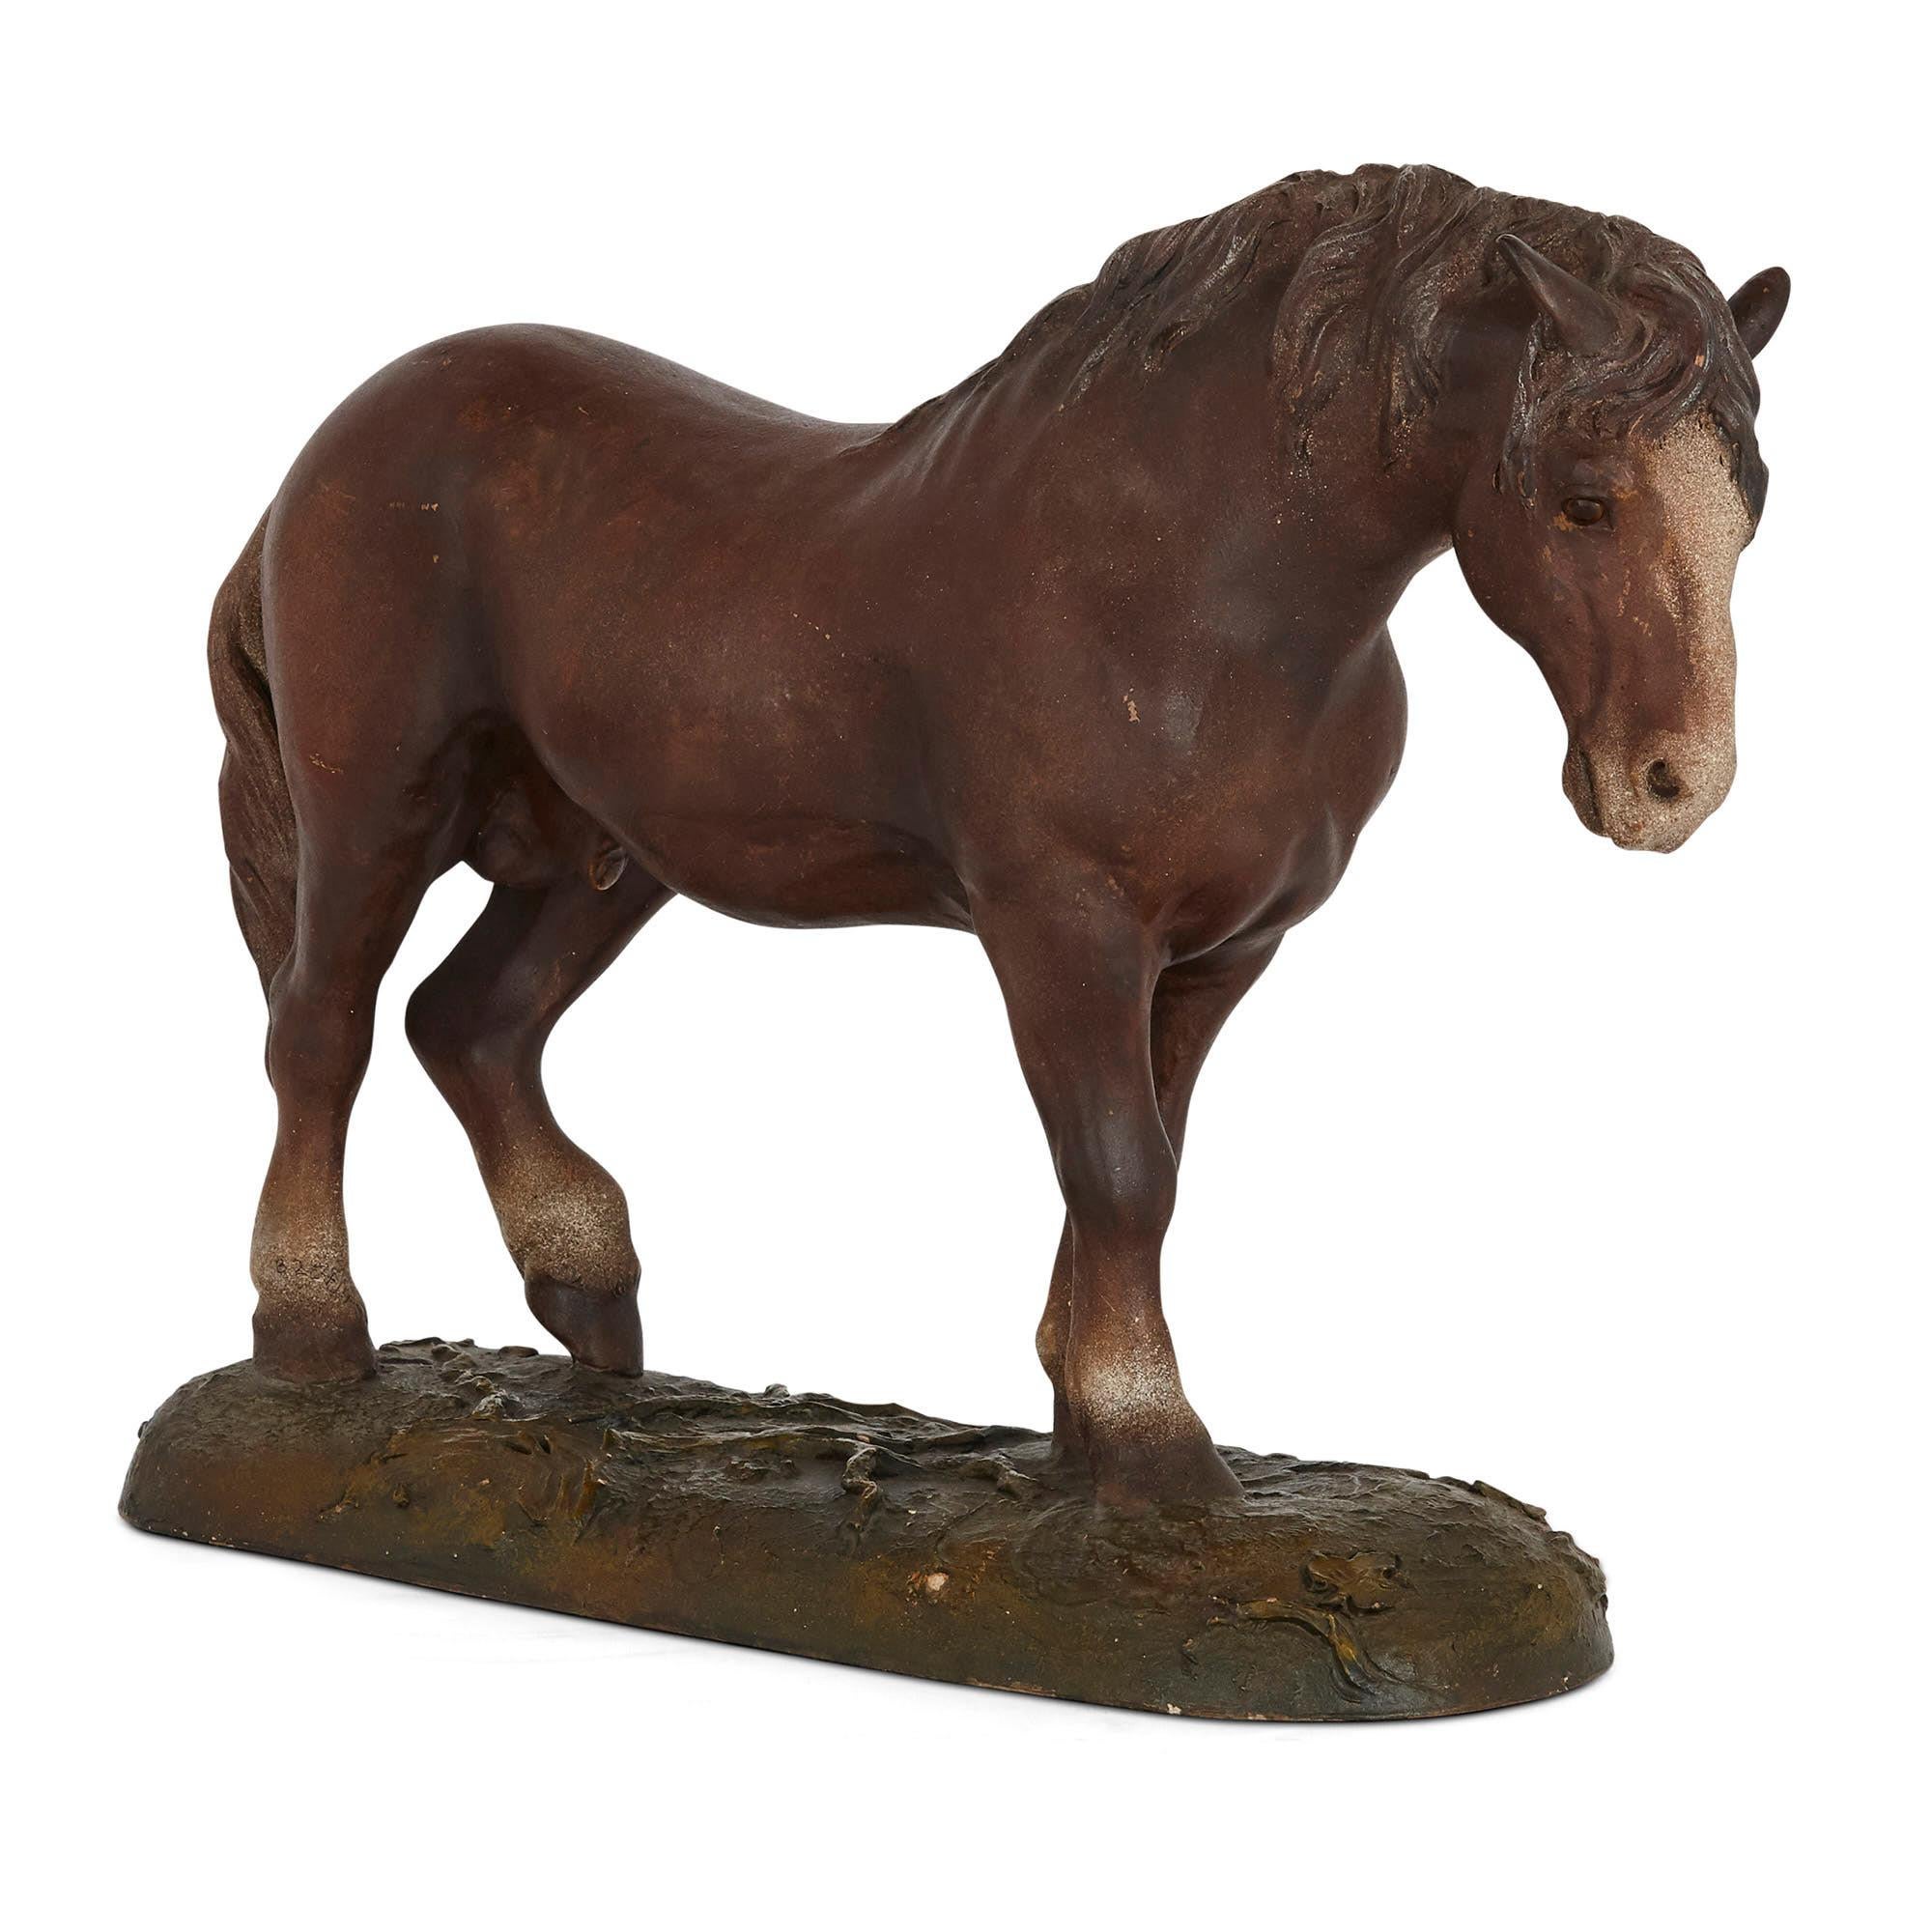 Antique terracotta equestrian model of a horse
Continental, early 20th century
Dimensions: Height 37cm, width 46cm, depth 17cm

This naturalistically rendered horse sculpture is crafted from painted terracotta in the early 1900s. It depicts an